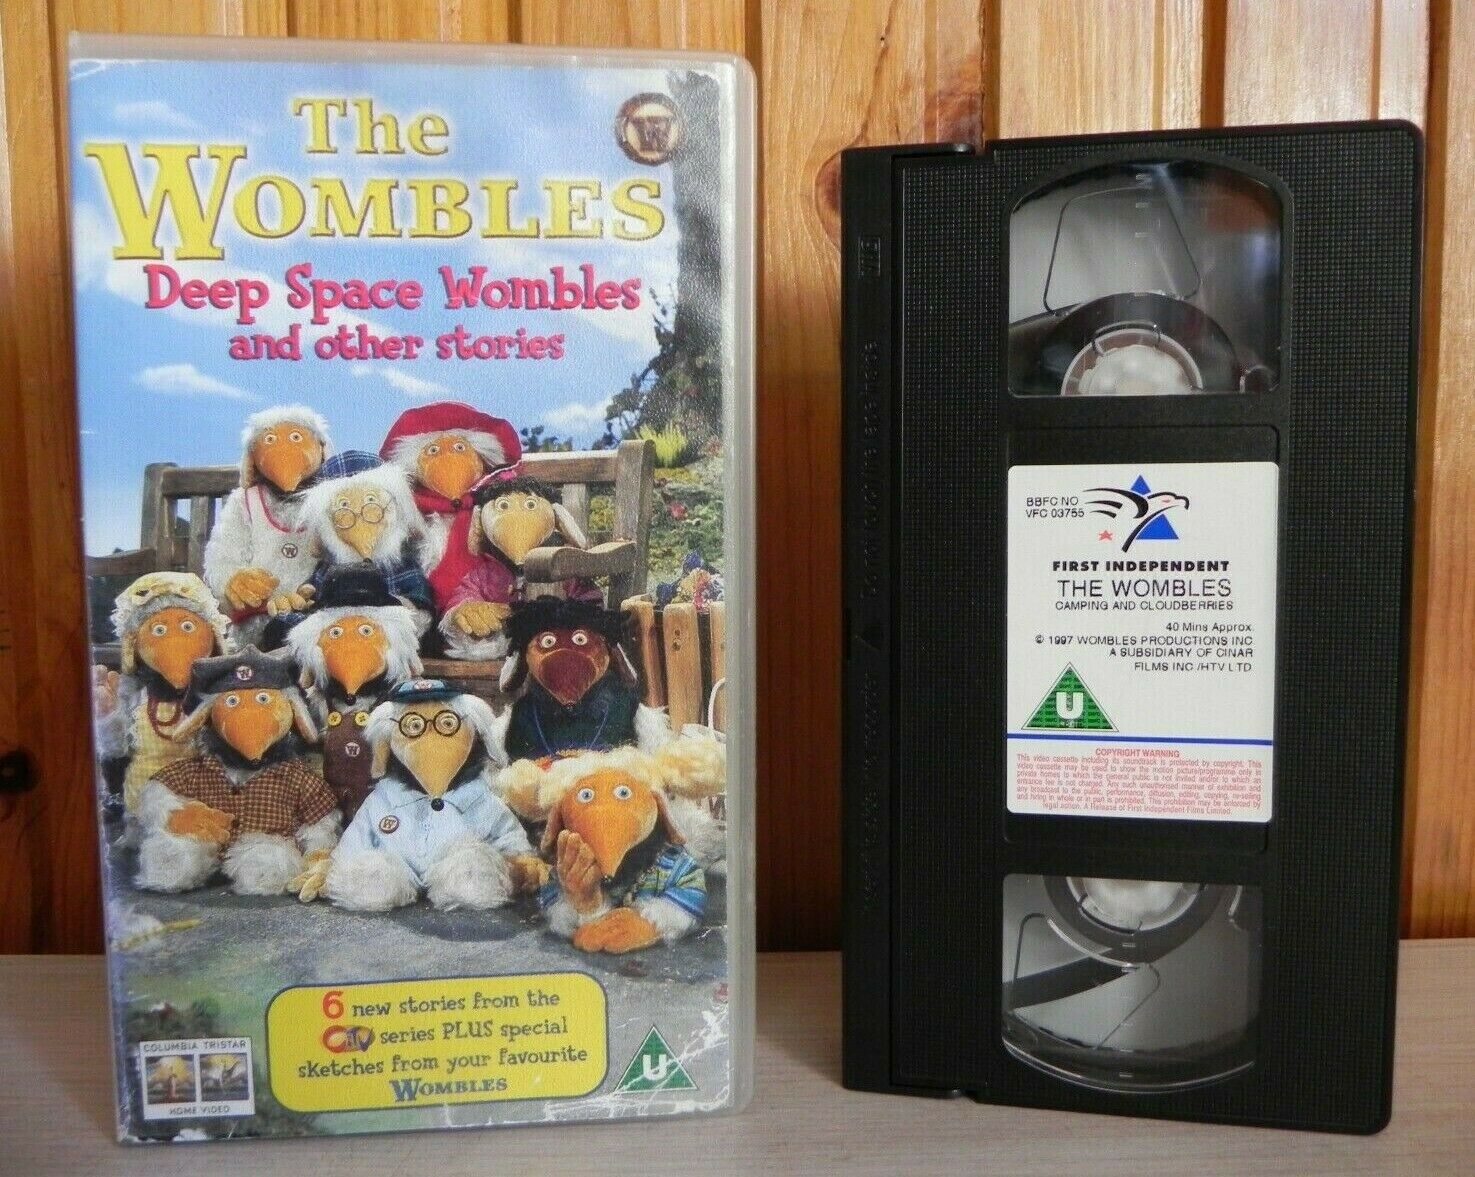 9. "The Wombles" - wide 3